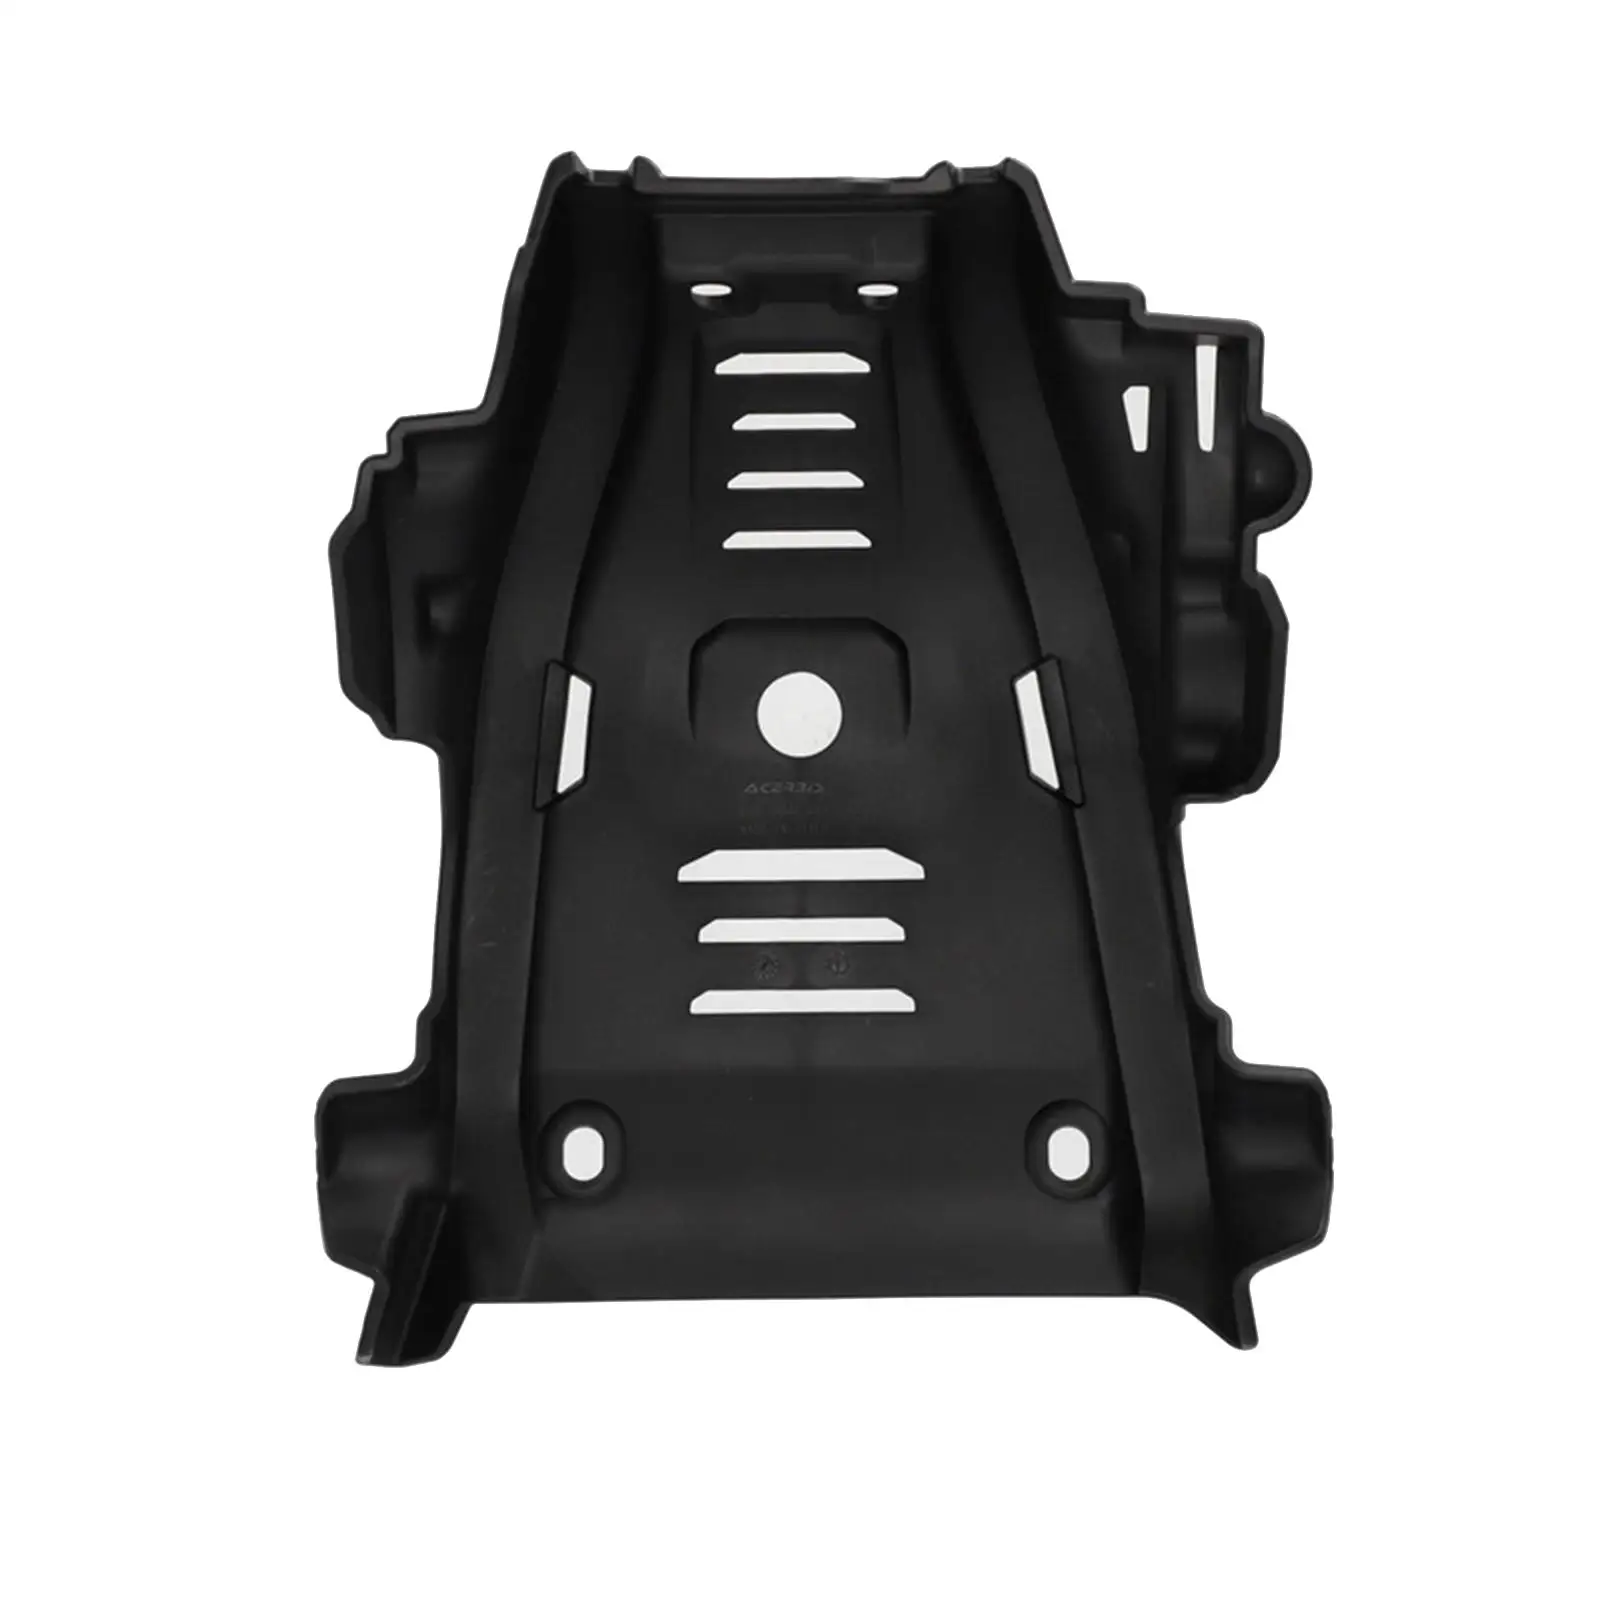 Engine Base Chassis Guard Plate for Crf300L High Performance Supplies